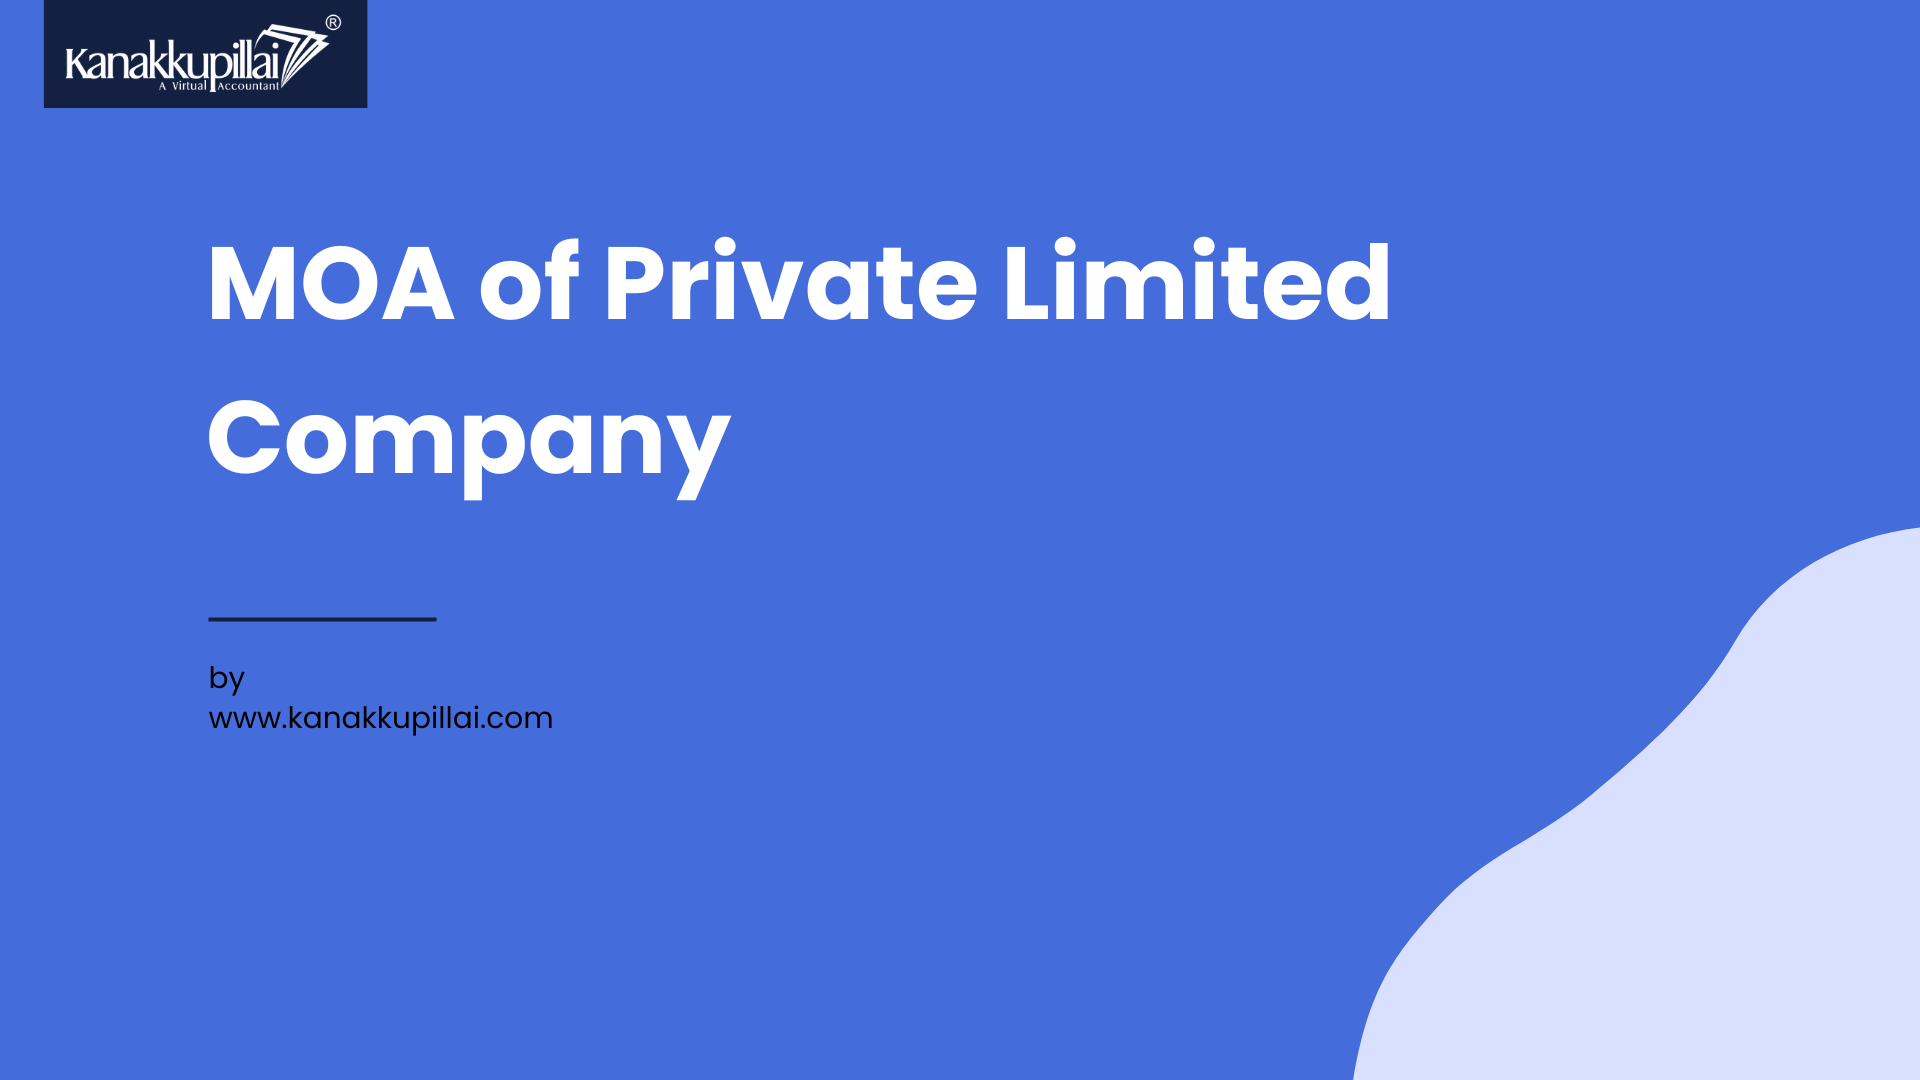 The MOA of Private Limited Company: A Comprehensive Guide